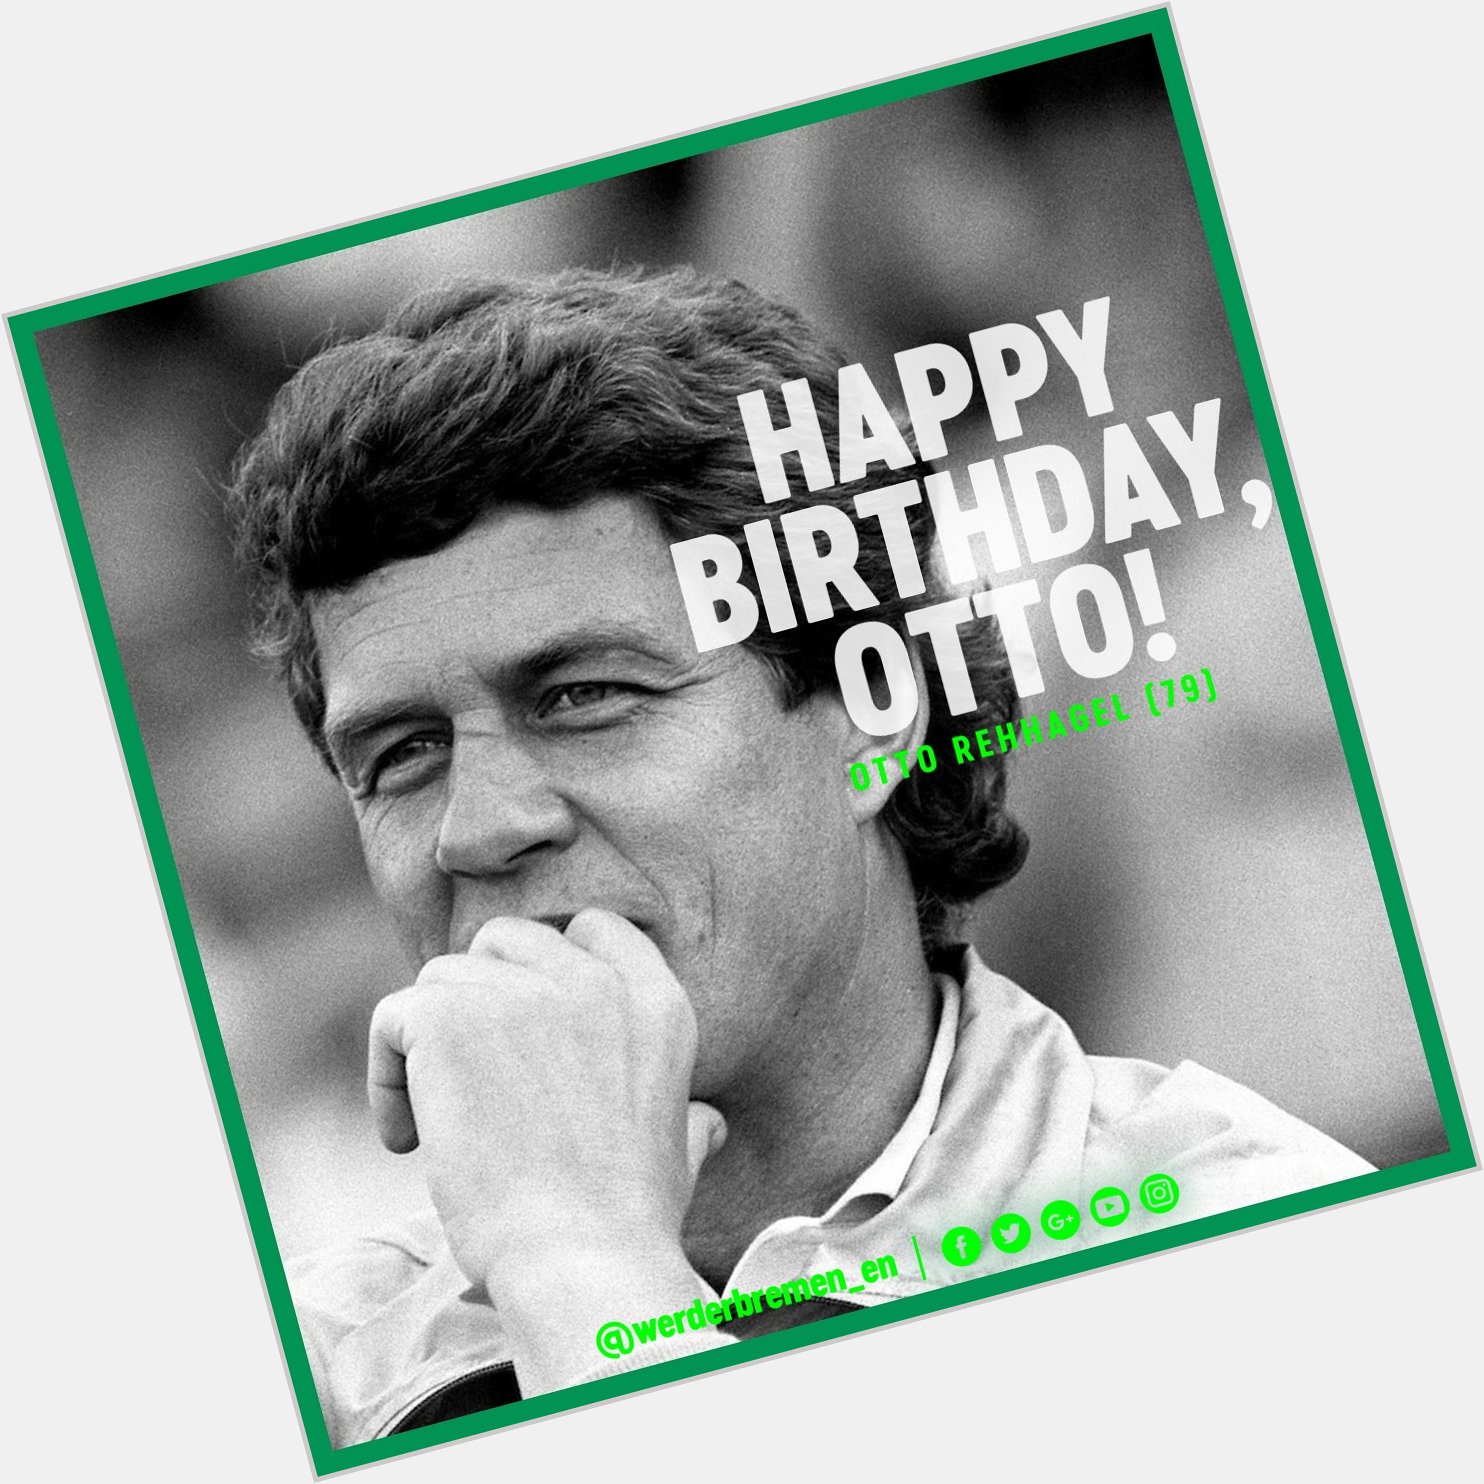 Happy Birthday, Otto Rehhagel! Our former head coach turns 7  9  today! 